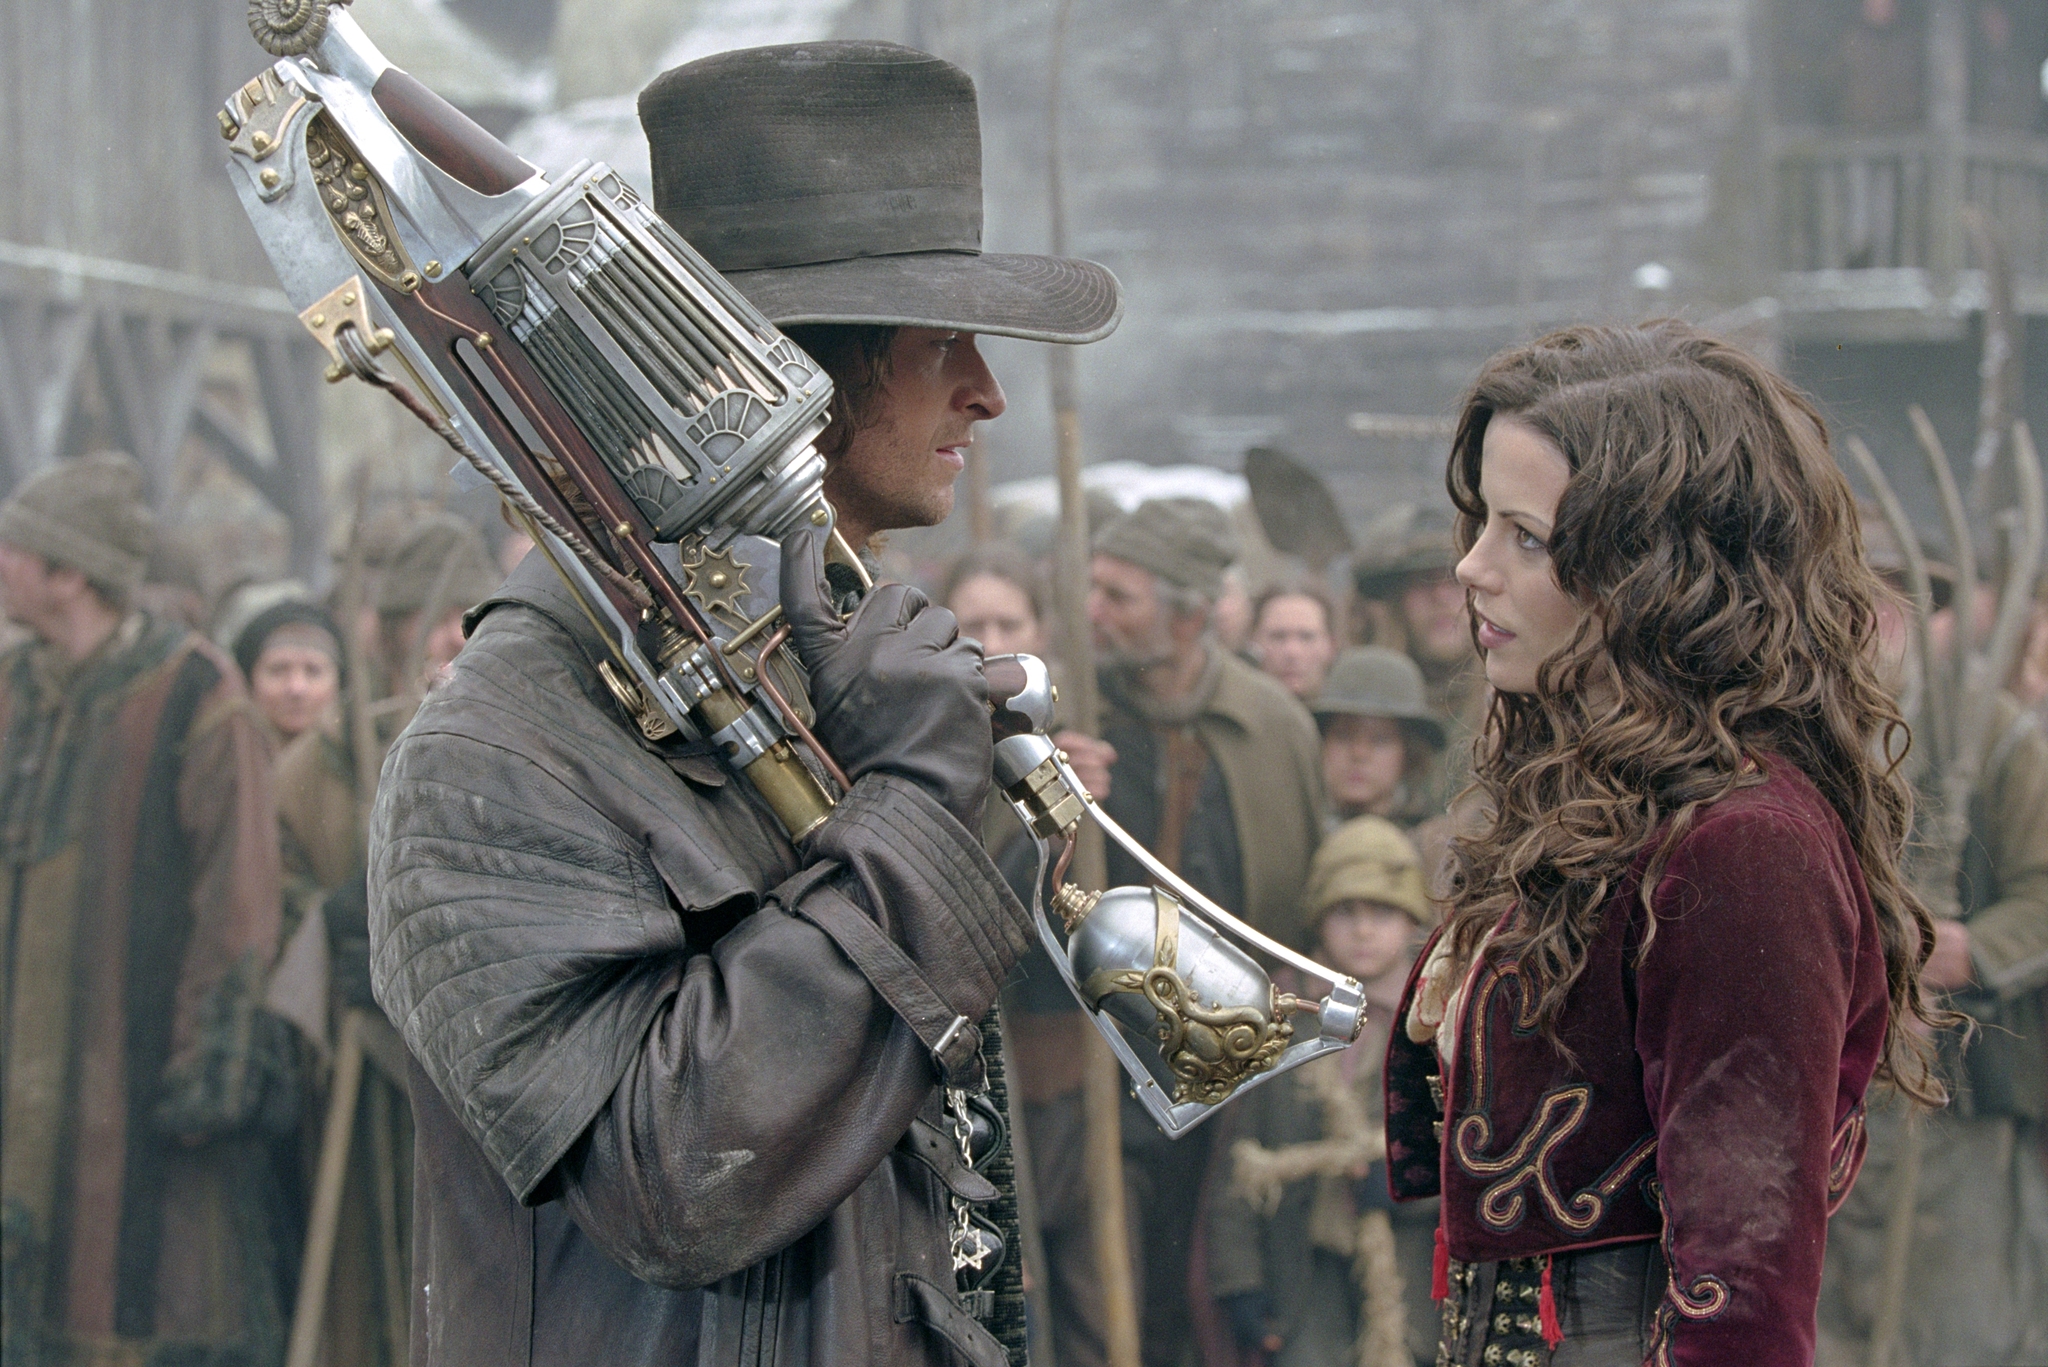 Van Helsing. It's Hugh Jackman, Kate Beckinsale ala the glory days of 2004. It's got a 27% on rotten tomatoes,. 6/10 on IMDb but there's something about the dry jokes smattered in what's supposed to be high tension scenes, or scenes of sexual tension. The special effects aren't the greatest but at the same time it also adds to the experience. -Jakows